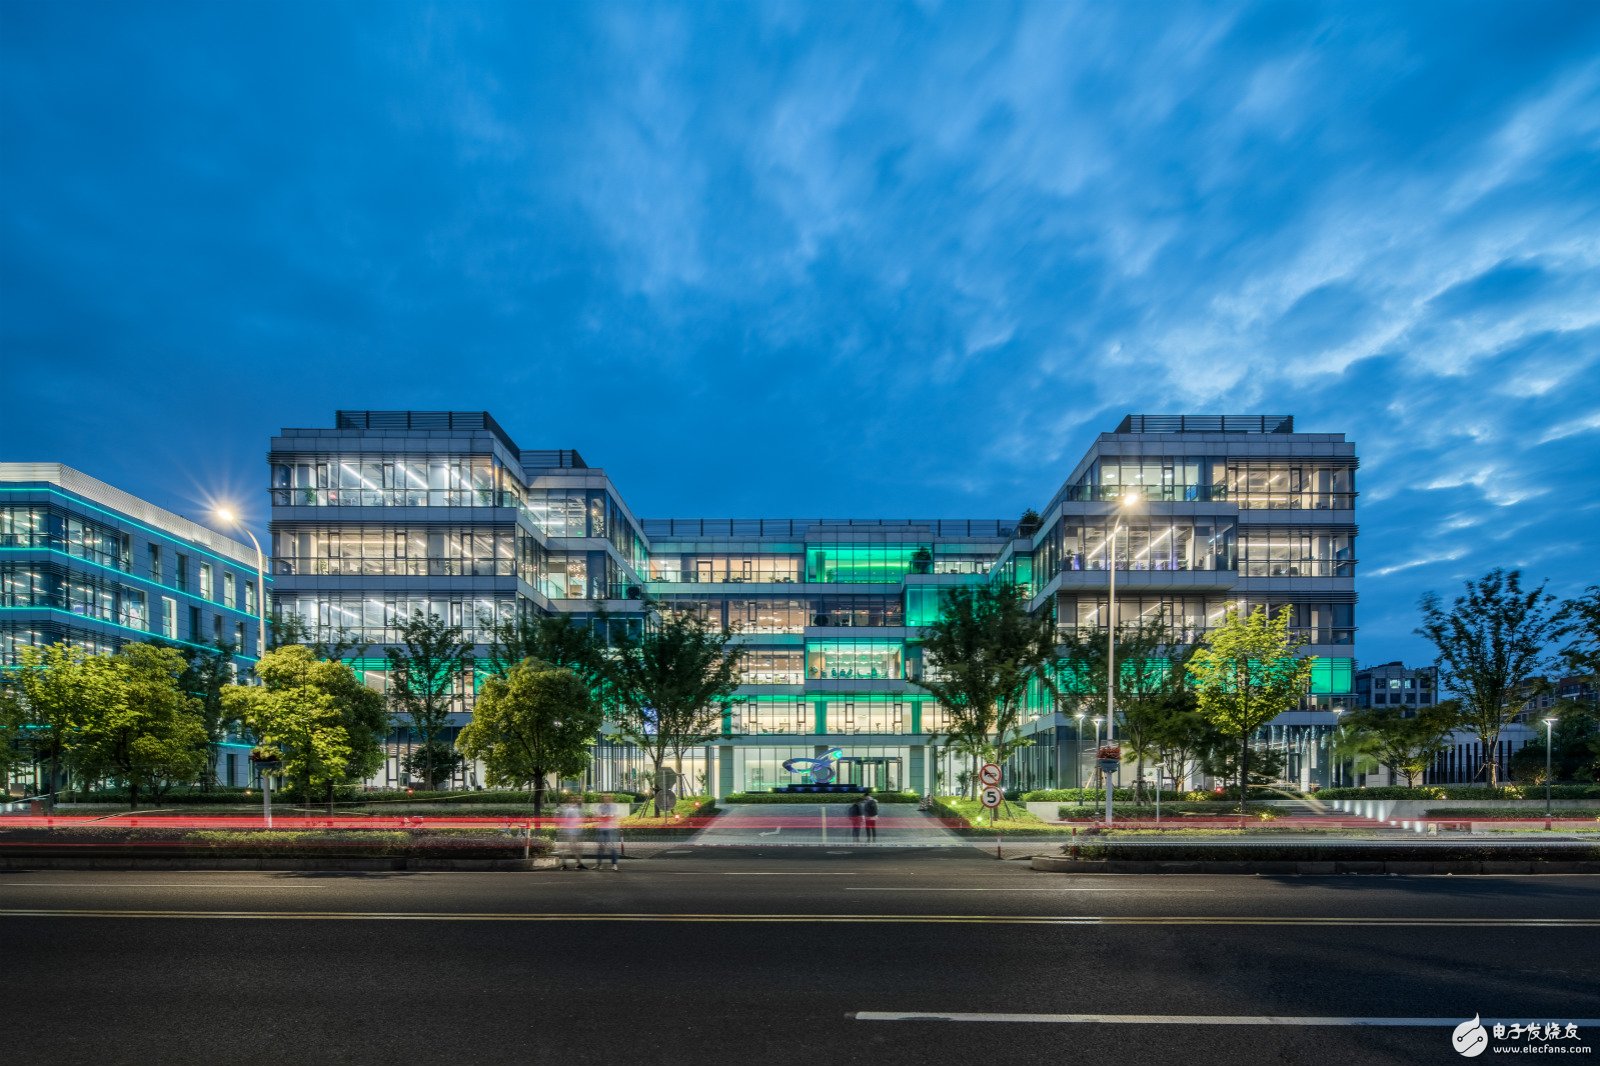 Philips Lighting changed its name to æ˜•è¯ºé£ž, and the new office building showed all aspects of IoT lighting.